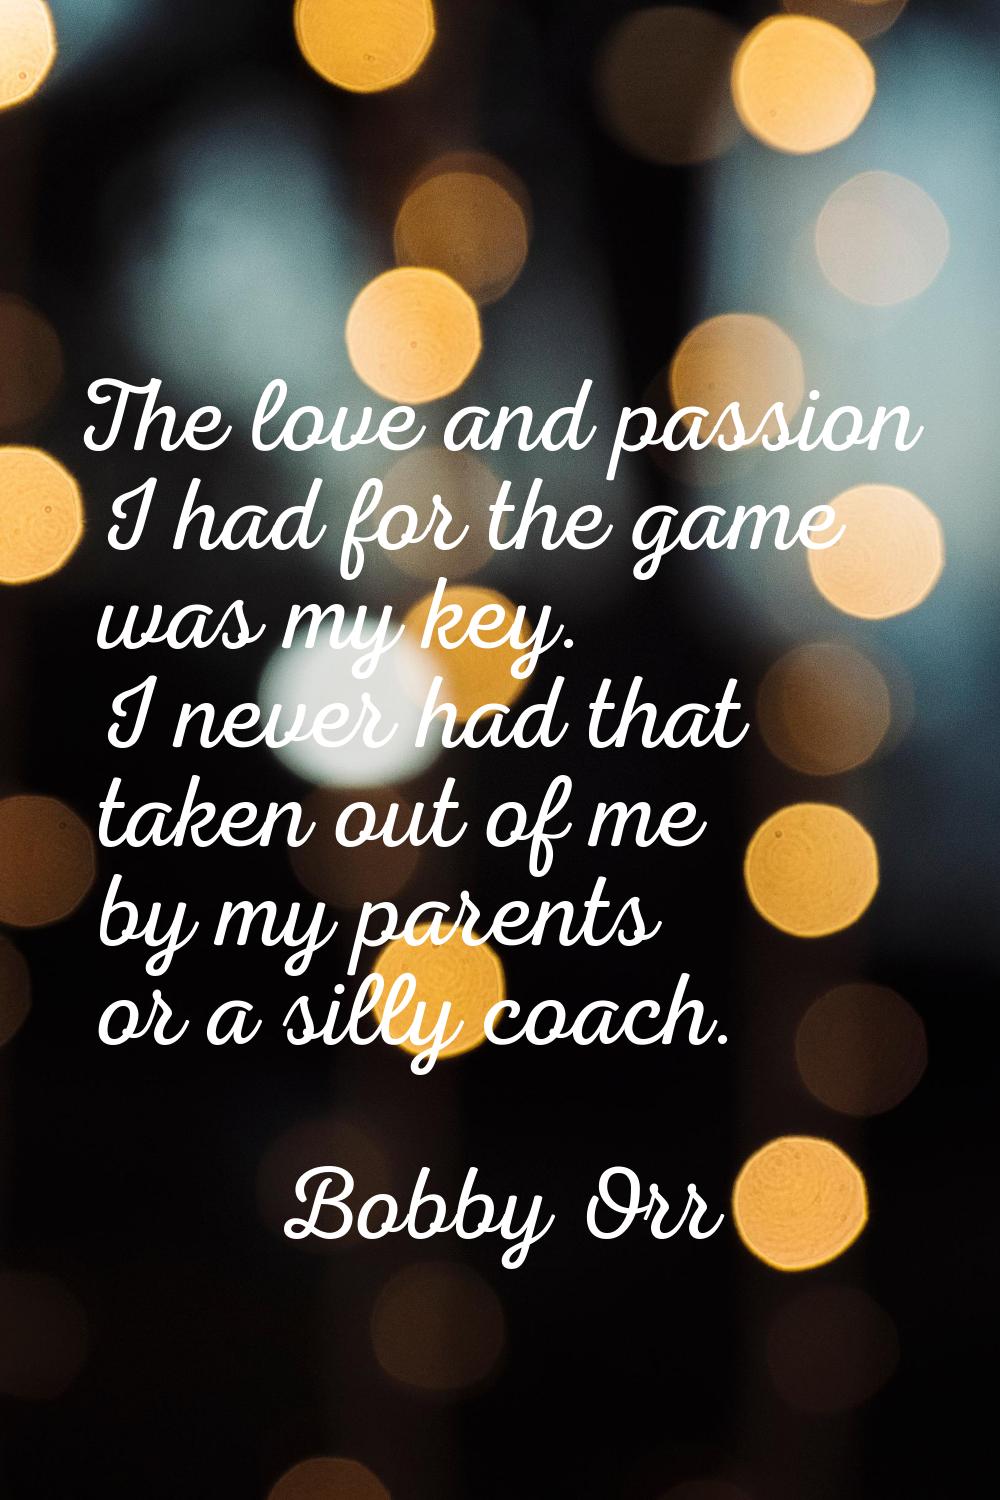 The love and passion I had for the game was my key. I never had that taken out of me by my parents 